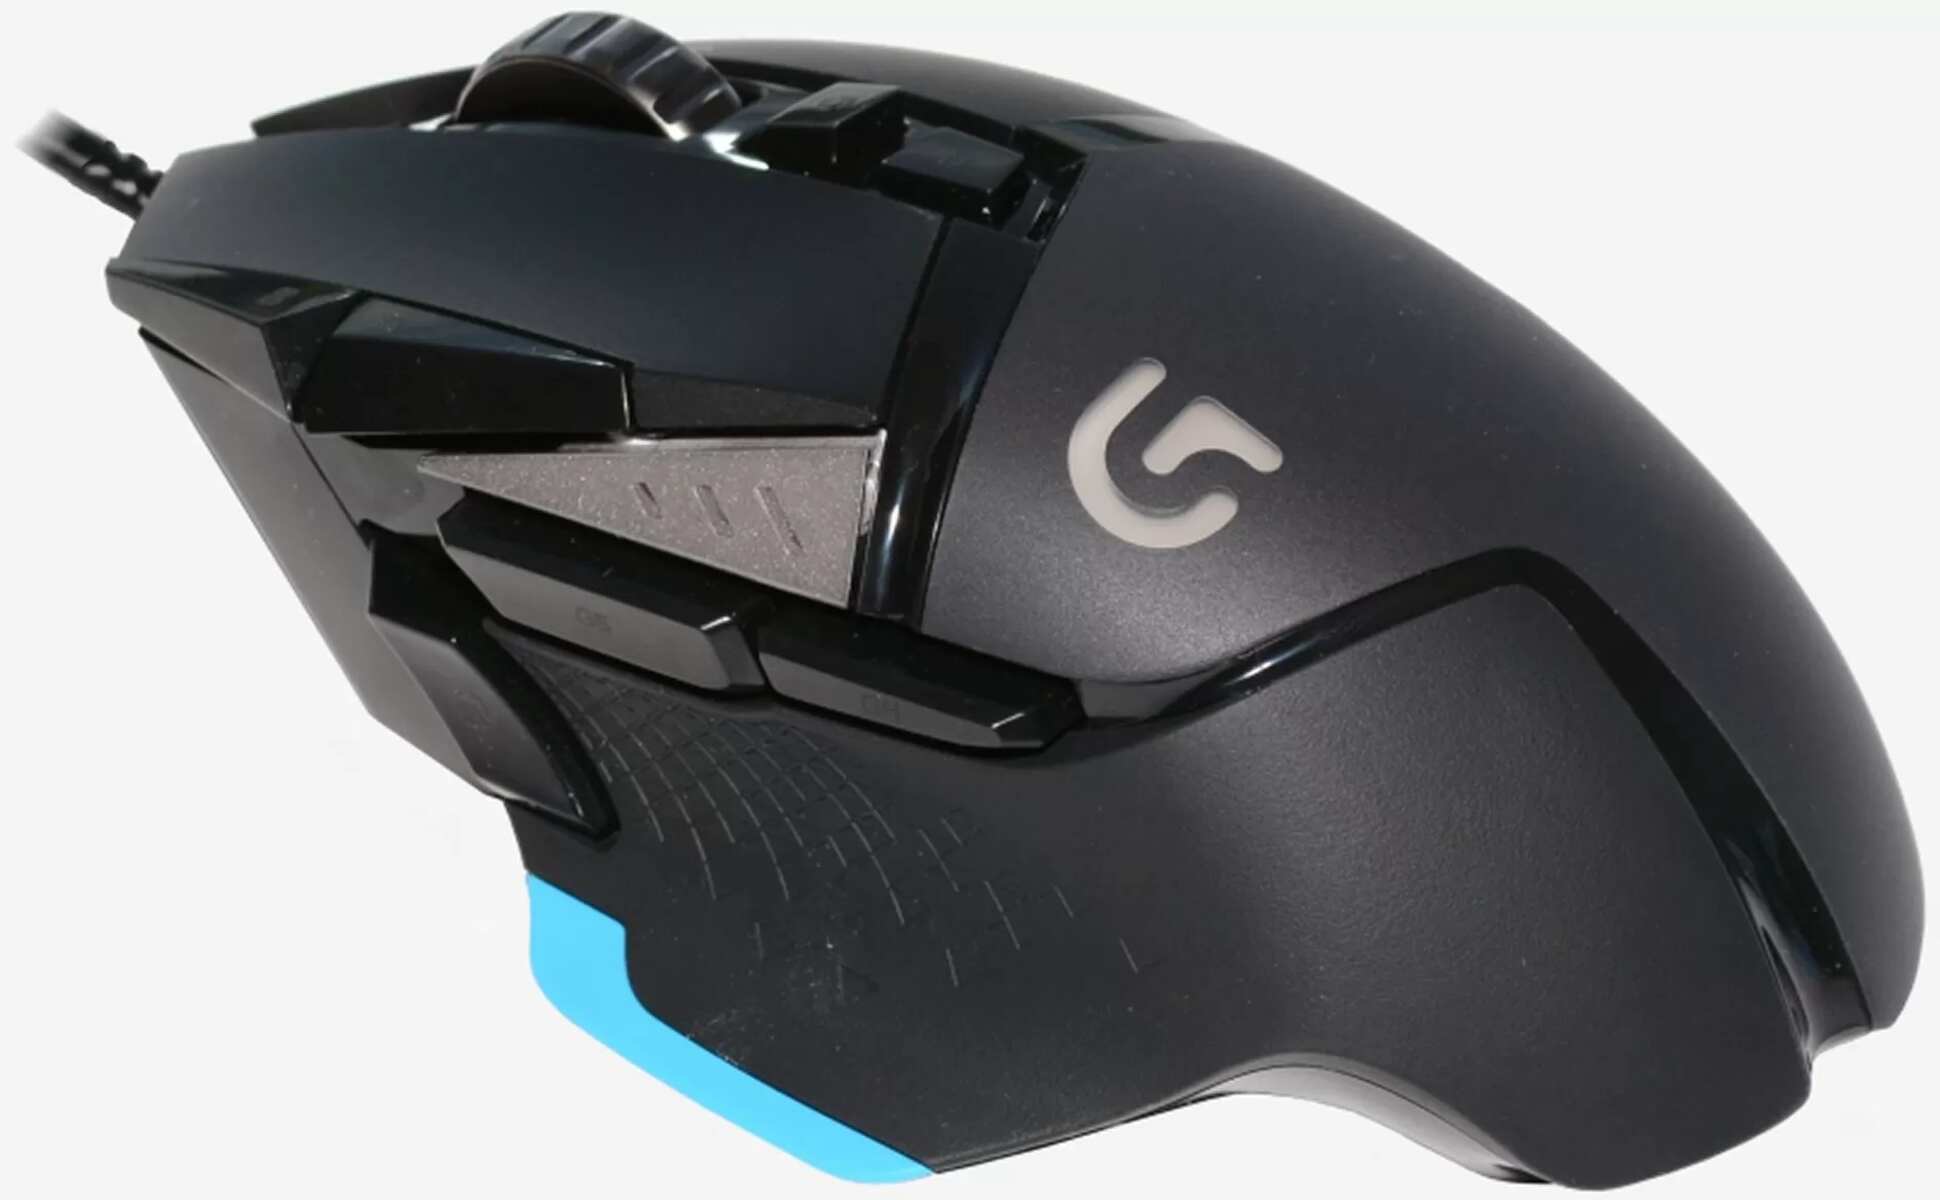 Logitech G502 Hero BEST GAMING MOUSE EVER Unboxing and Complete